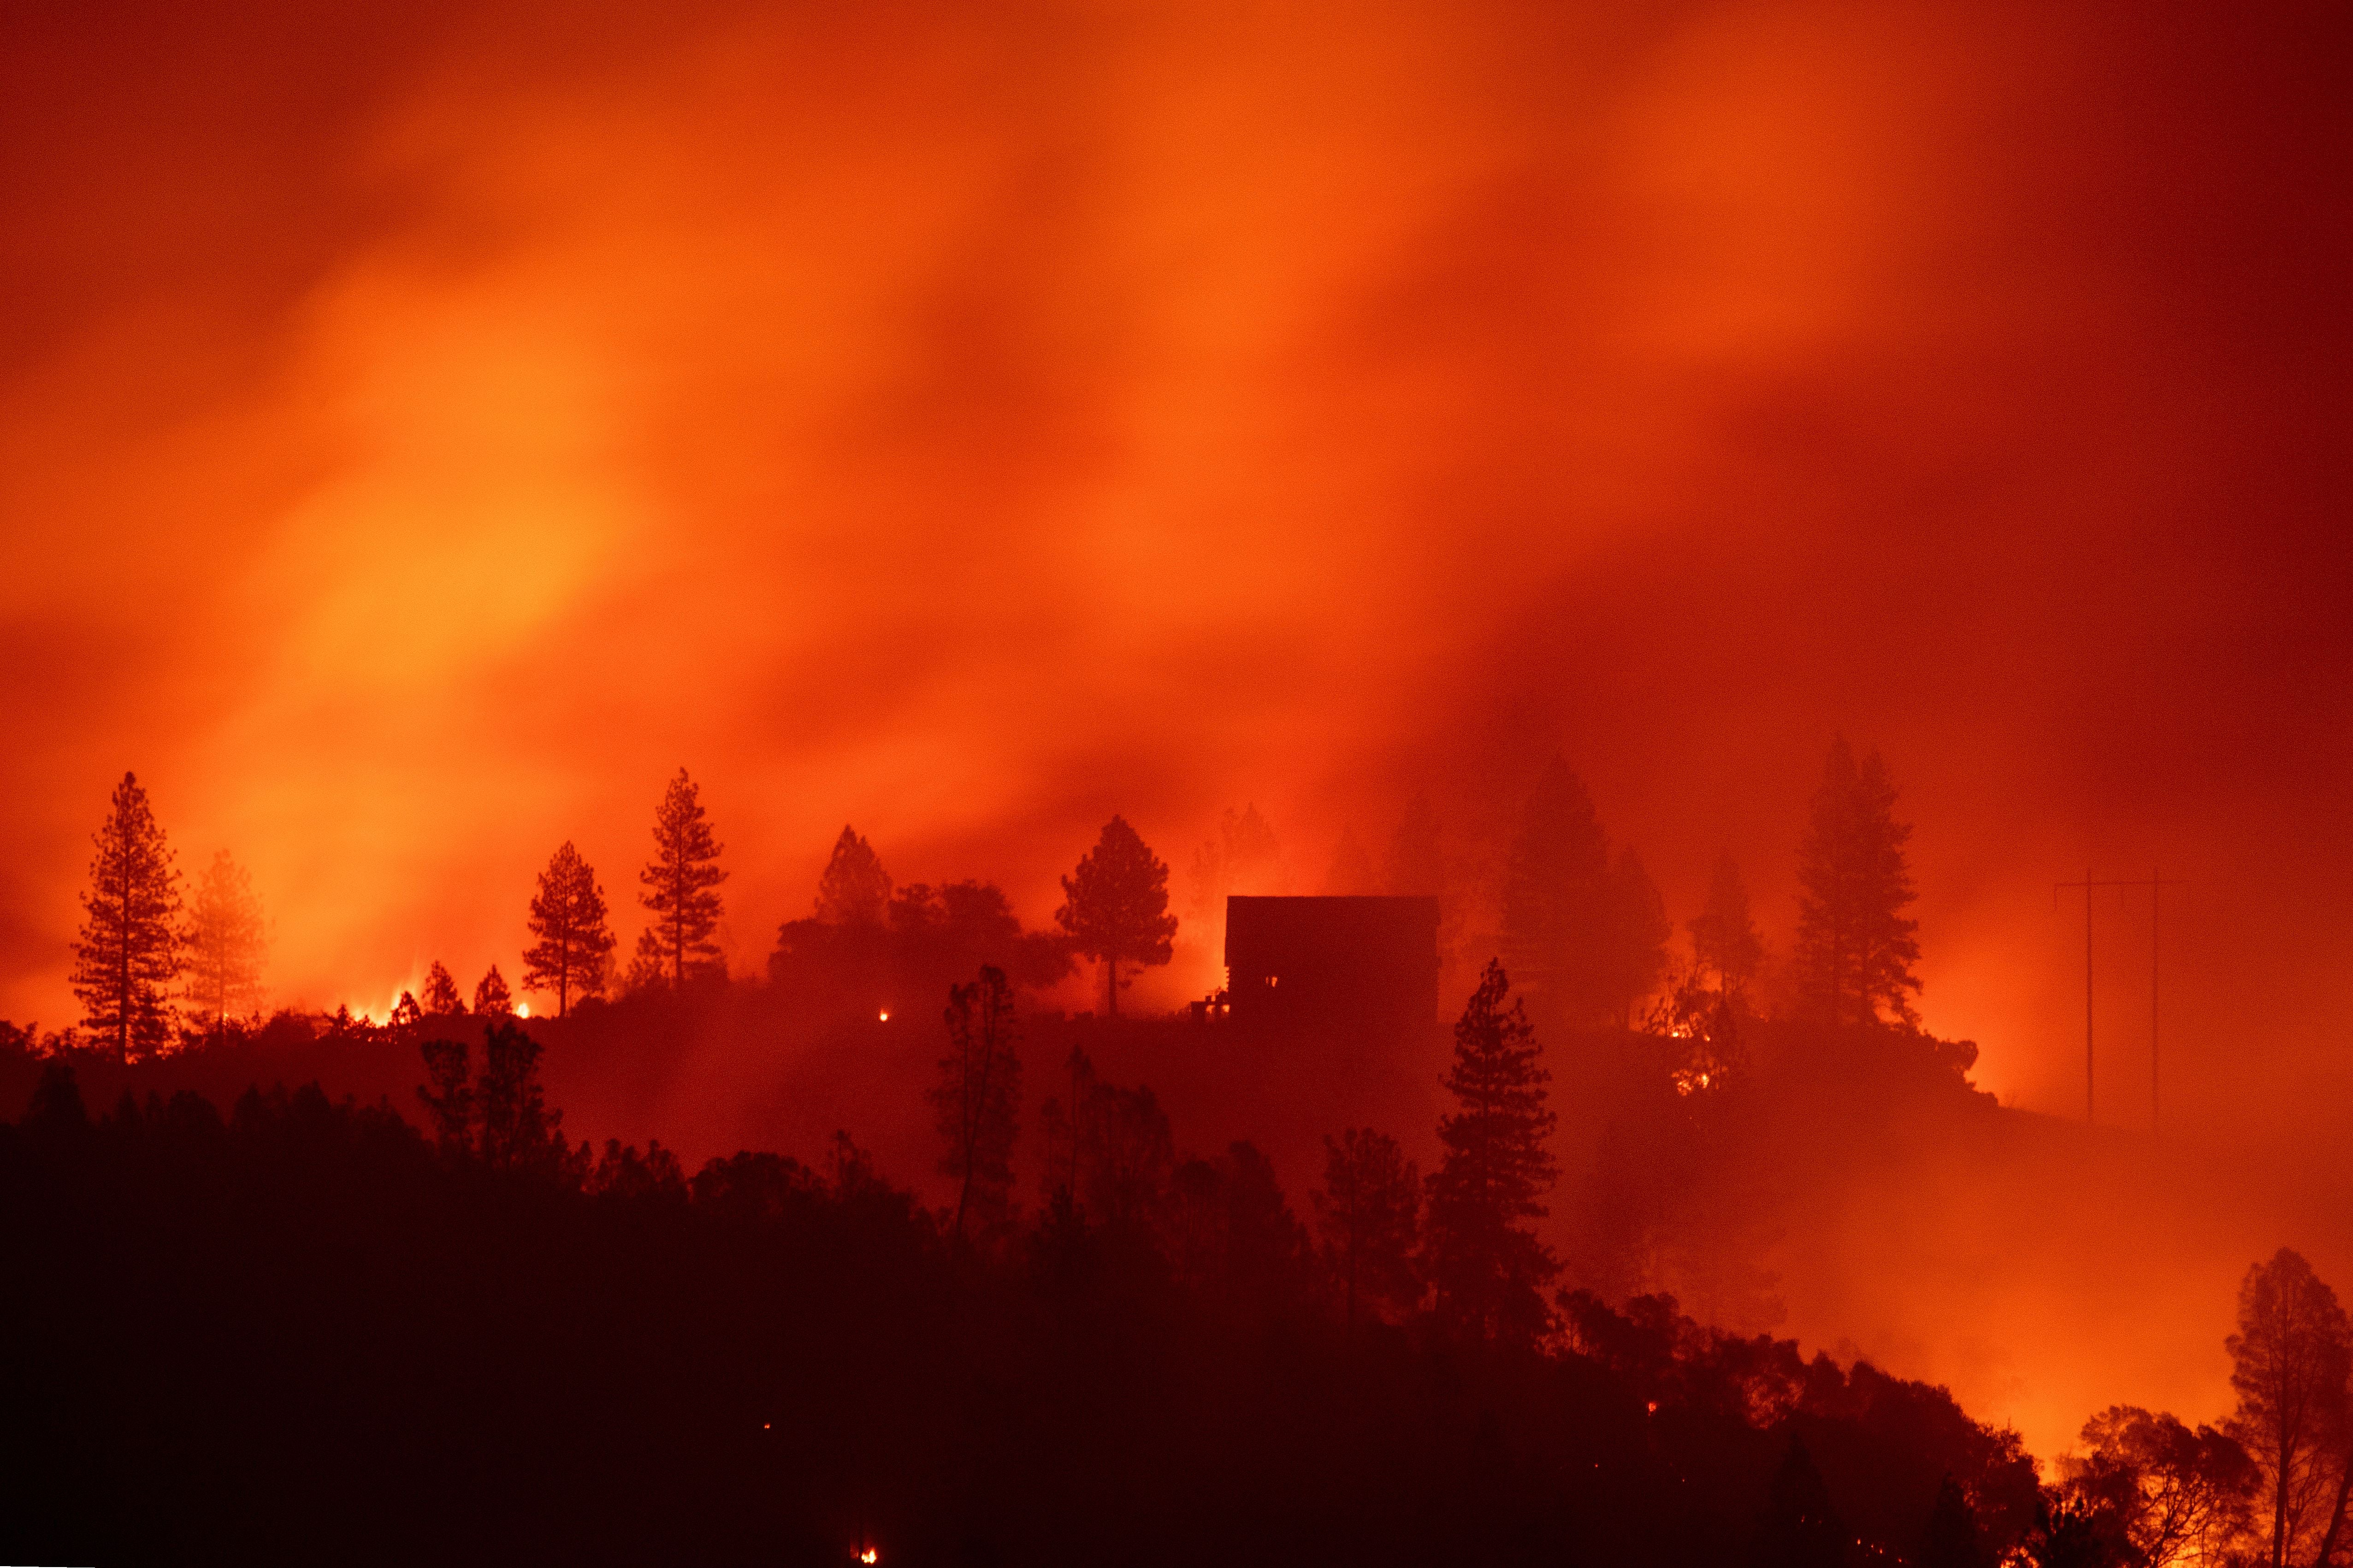 The ‘camp fire’ of 2018 was the deadliest and most destructive wildfire in California’s history